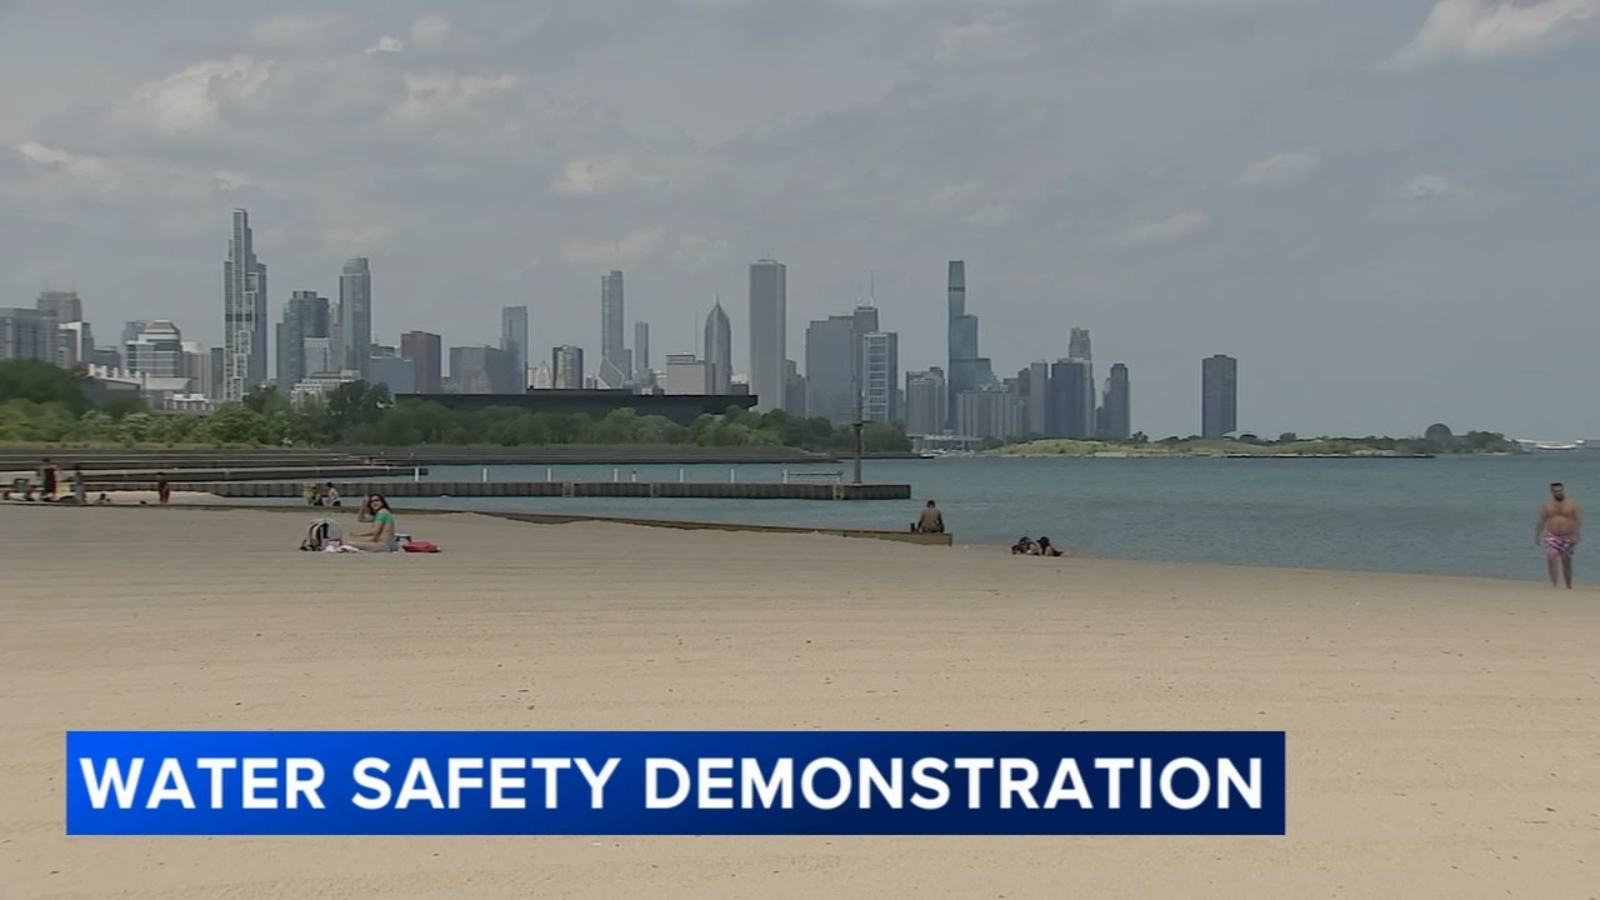 Chicago Fire Department hosts water rescue demonstration at Navy Pier; officials urge safety ahead of beaches opening [Video]